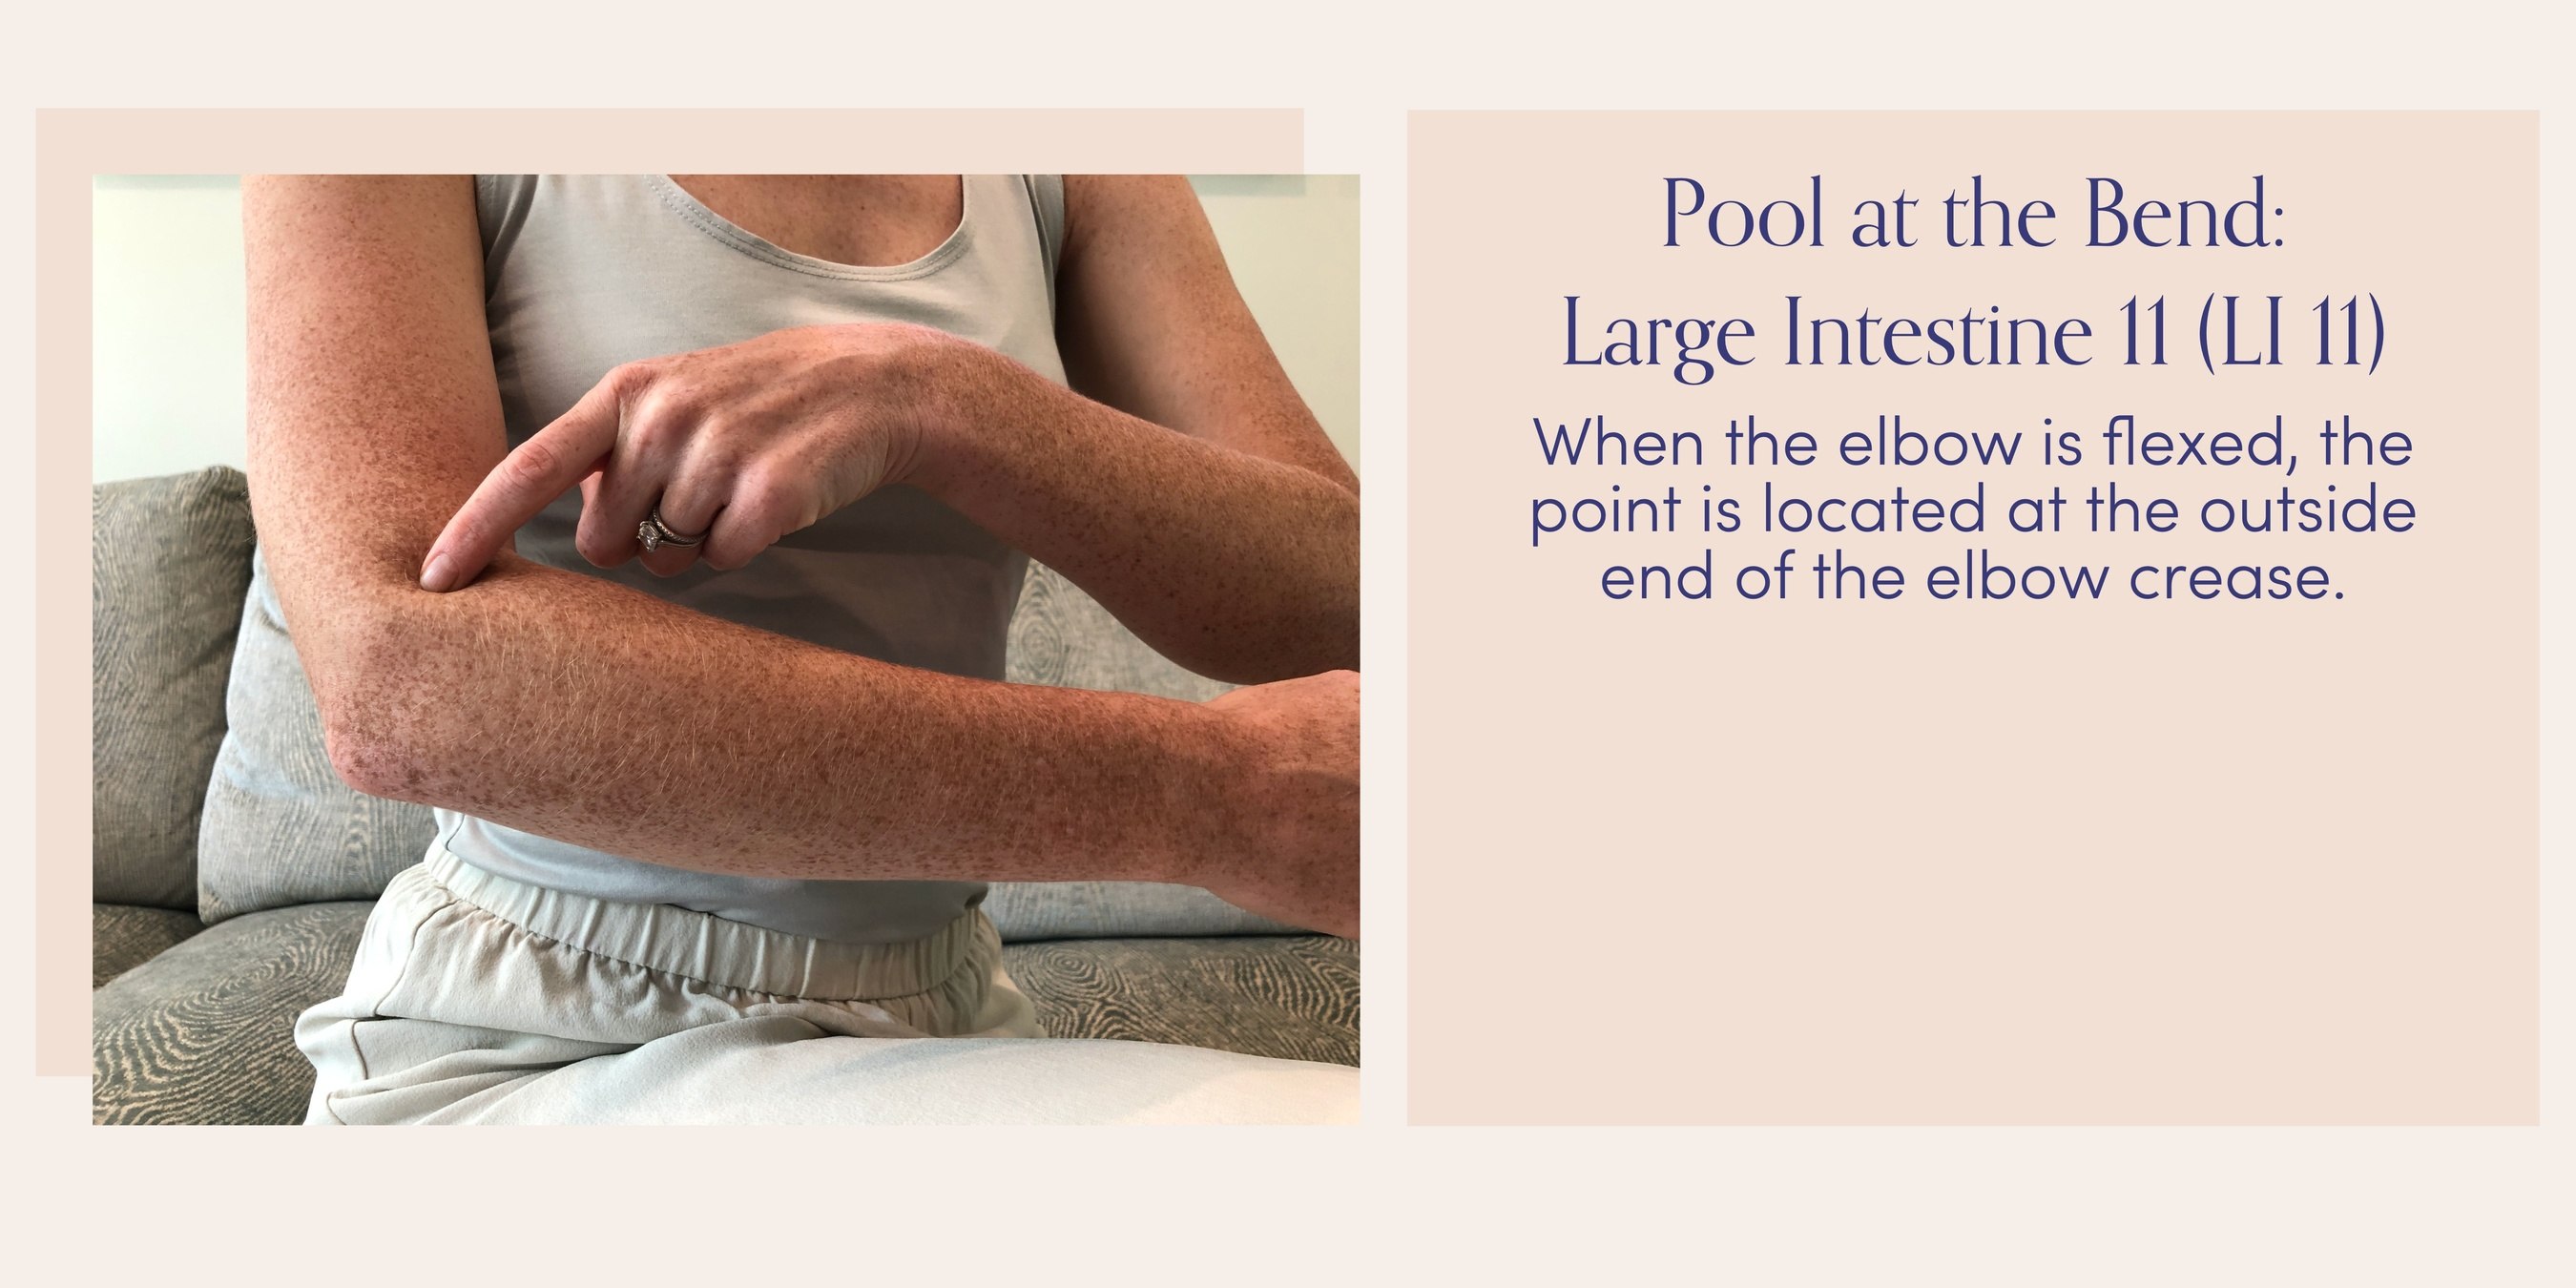 Acupressure point Large Intestine 11: When the elbow is flexed, the point is located at the outside end of the elbow crease.